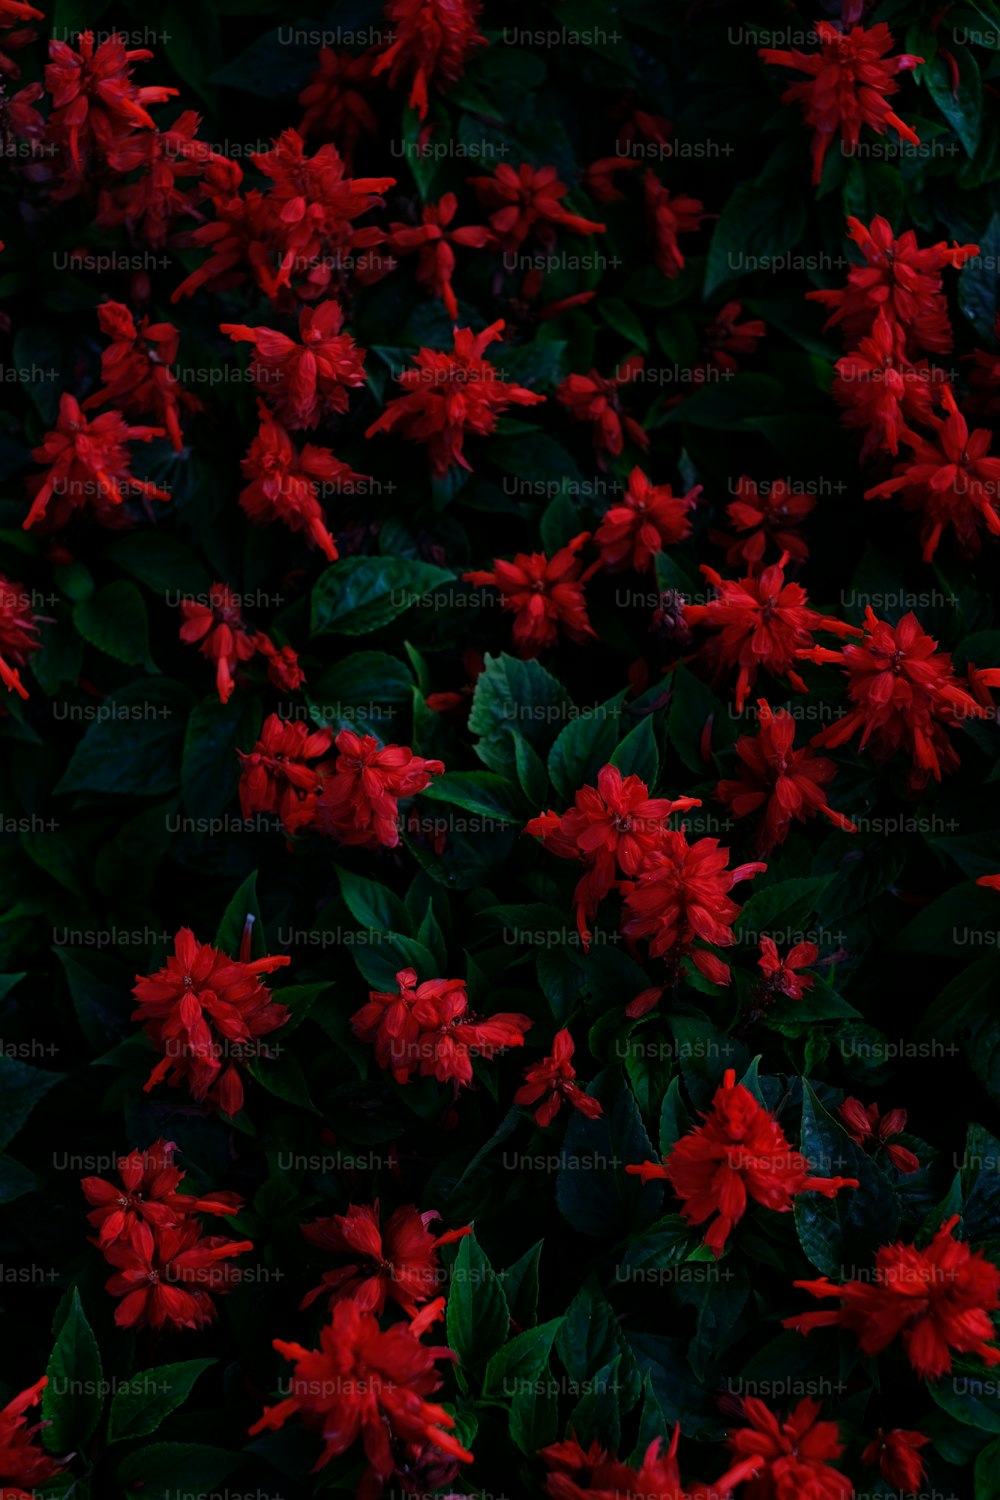 a bunch of red flowers with green leaves